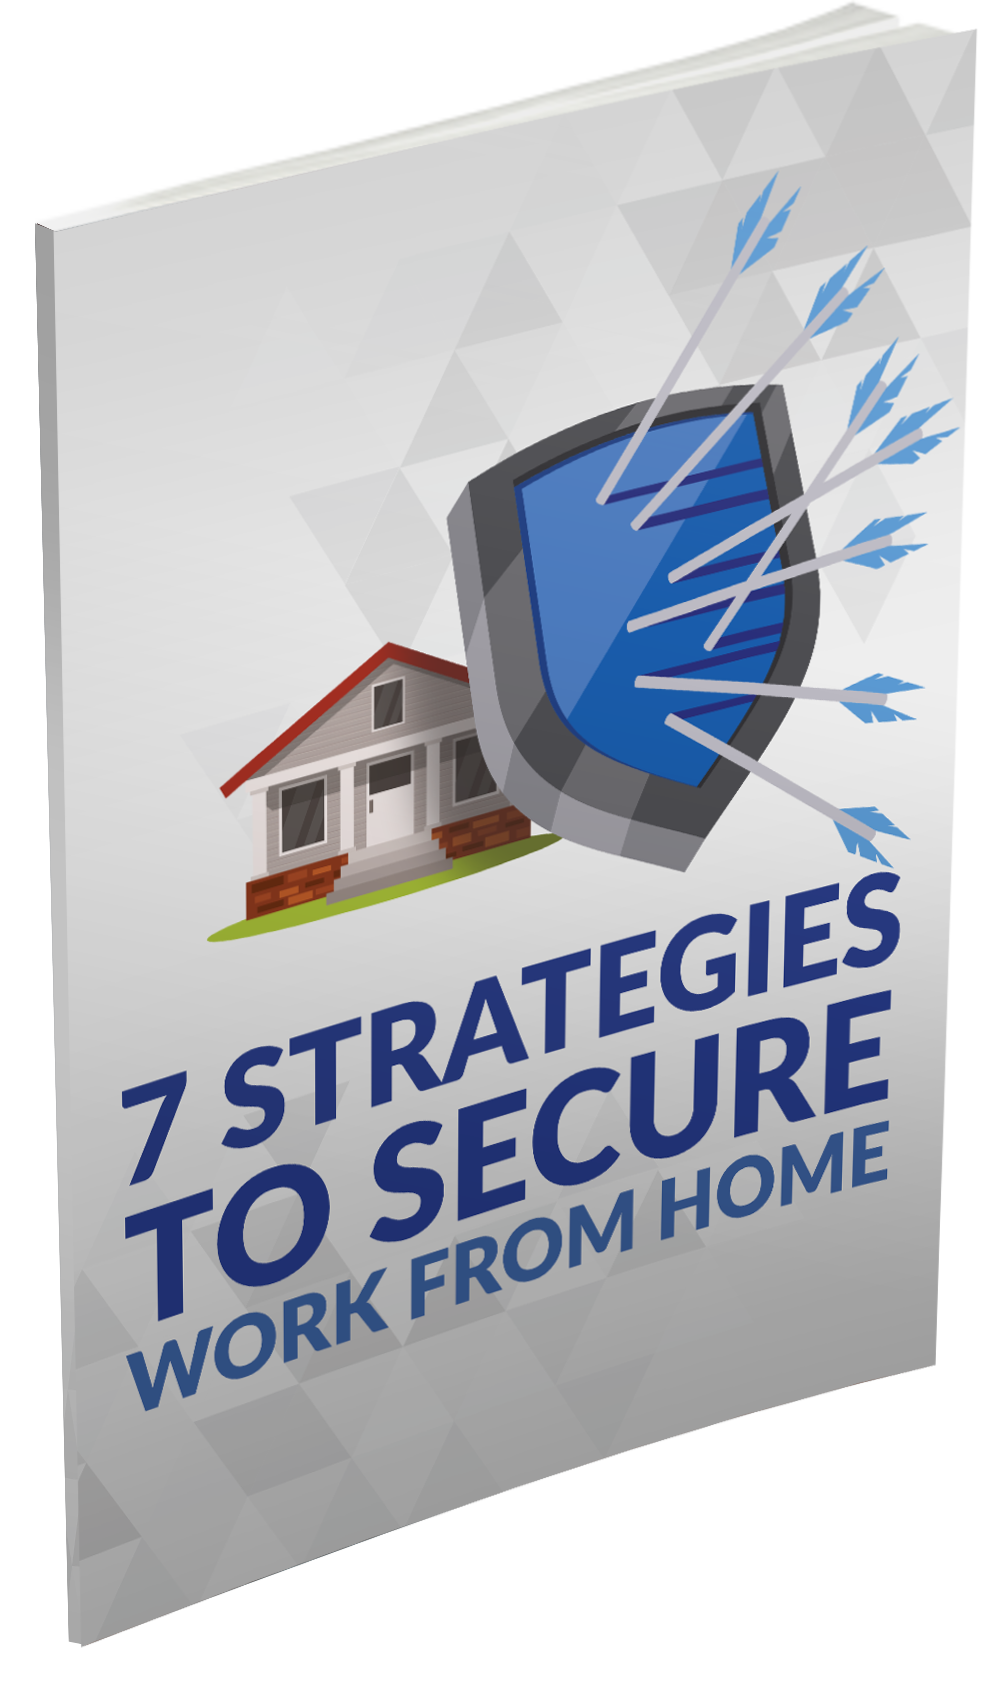 7 Strategies to Secure Work from Home